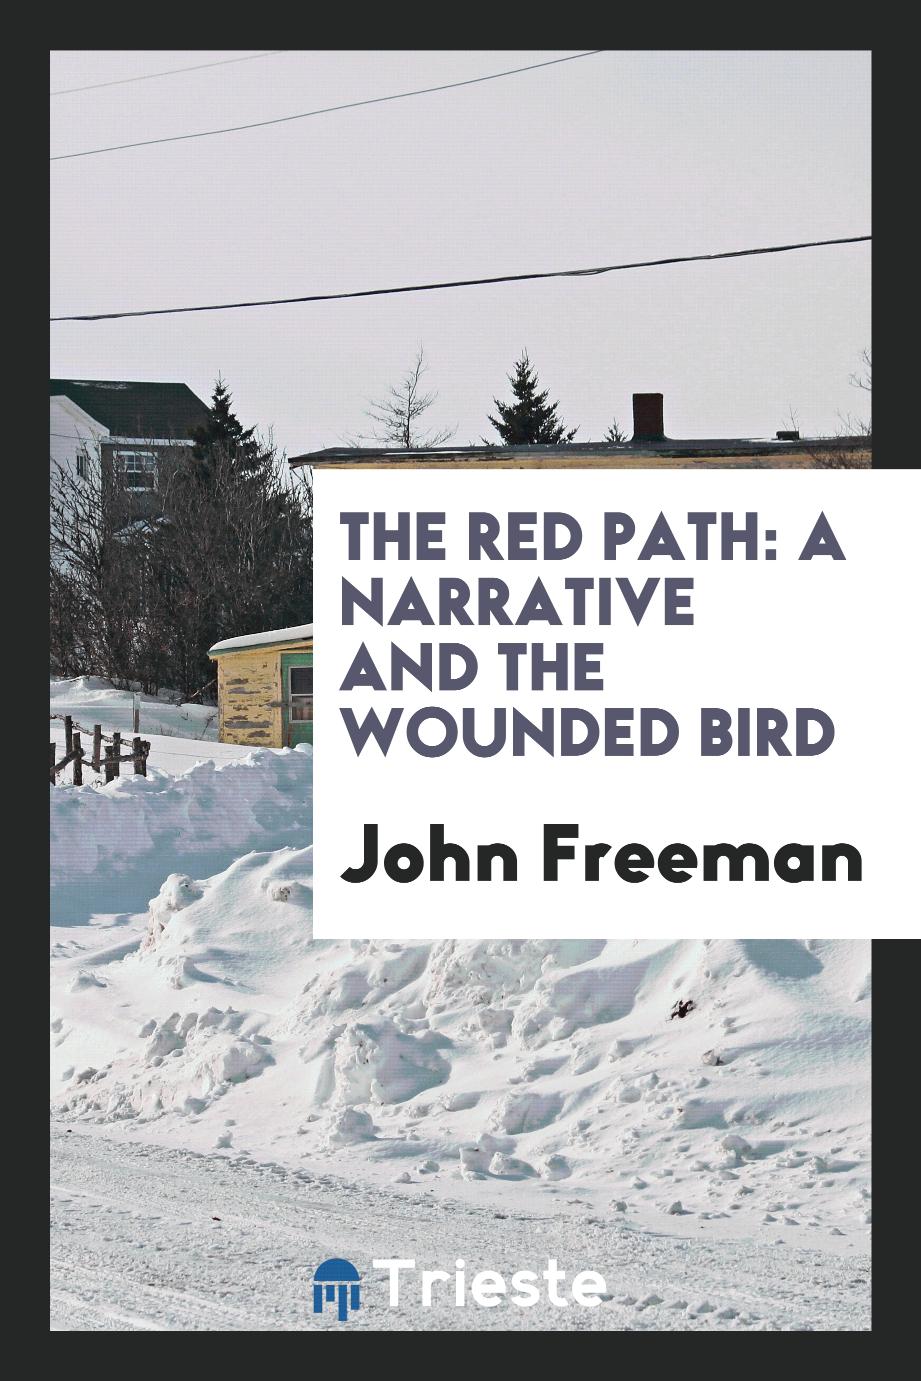 The red path: a narrative and The wounded bird